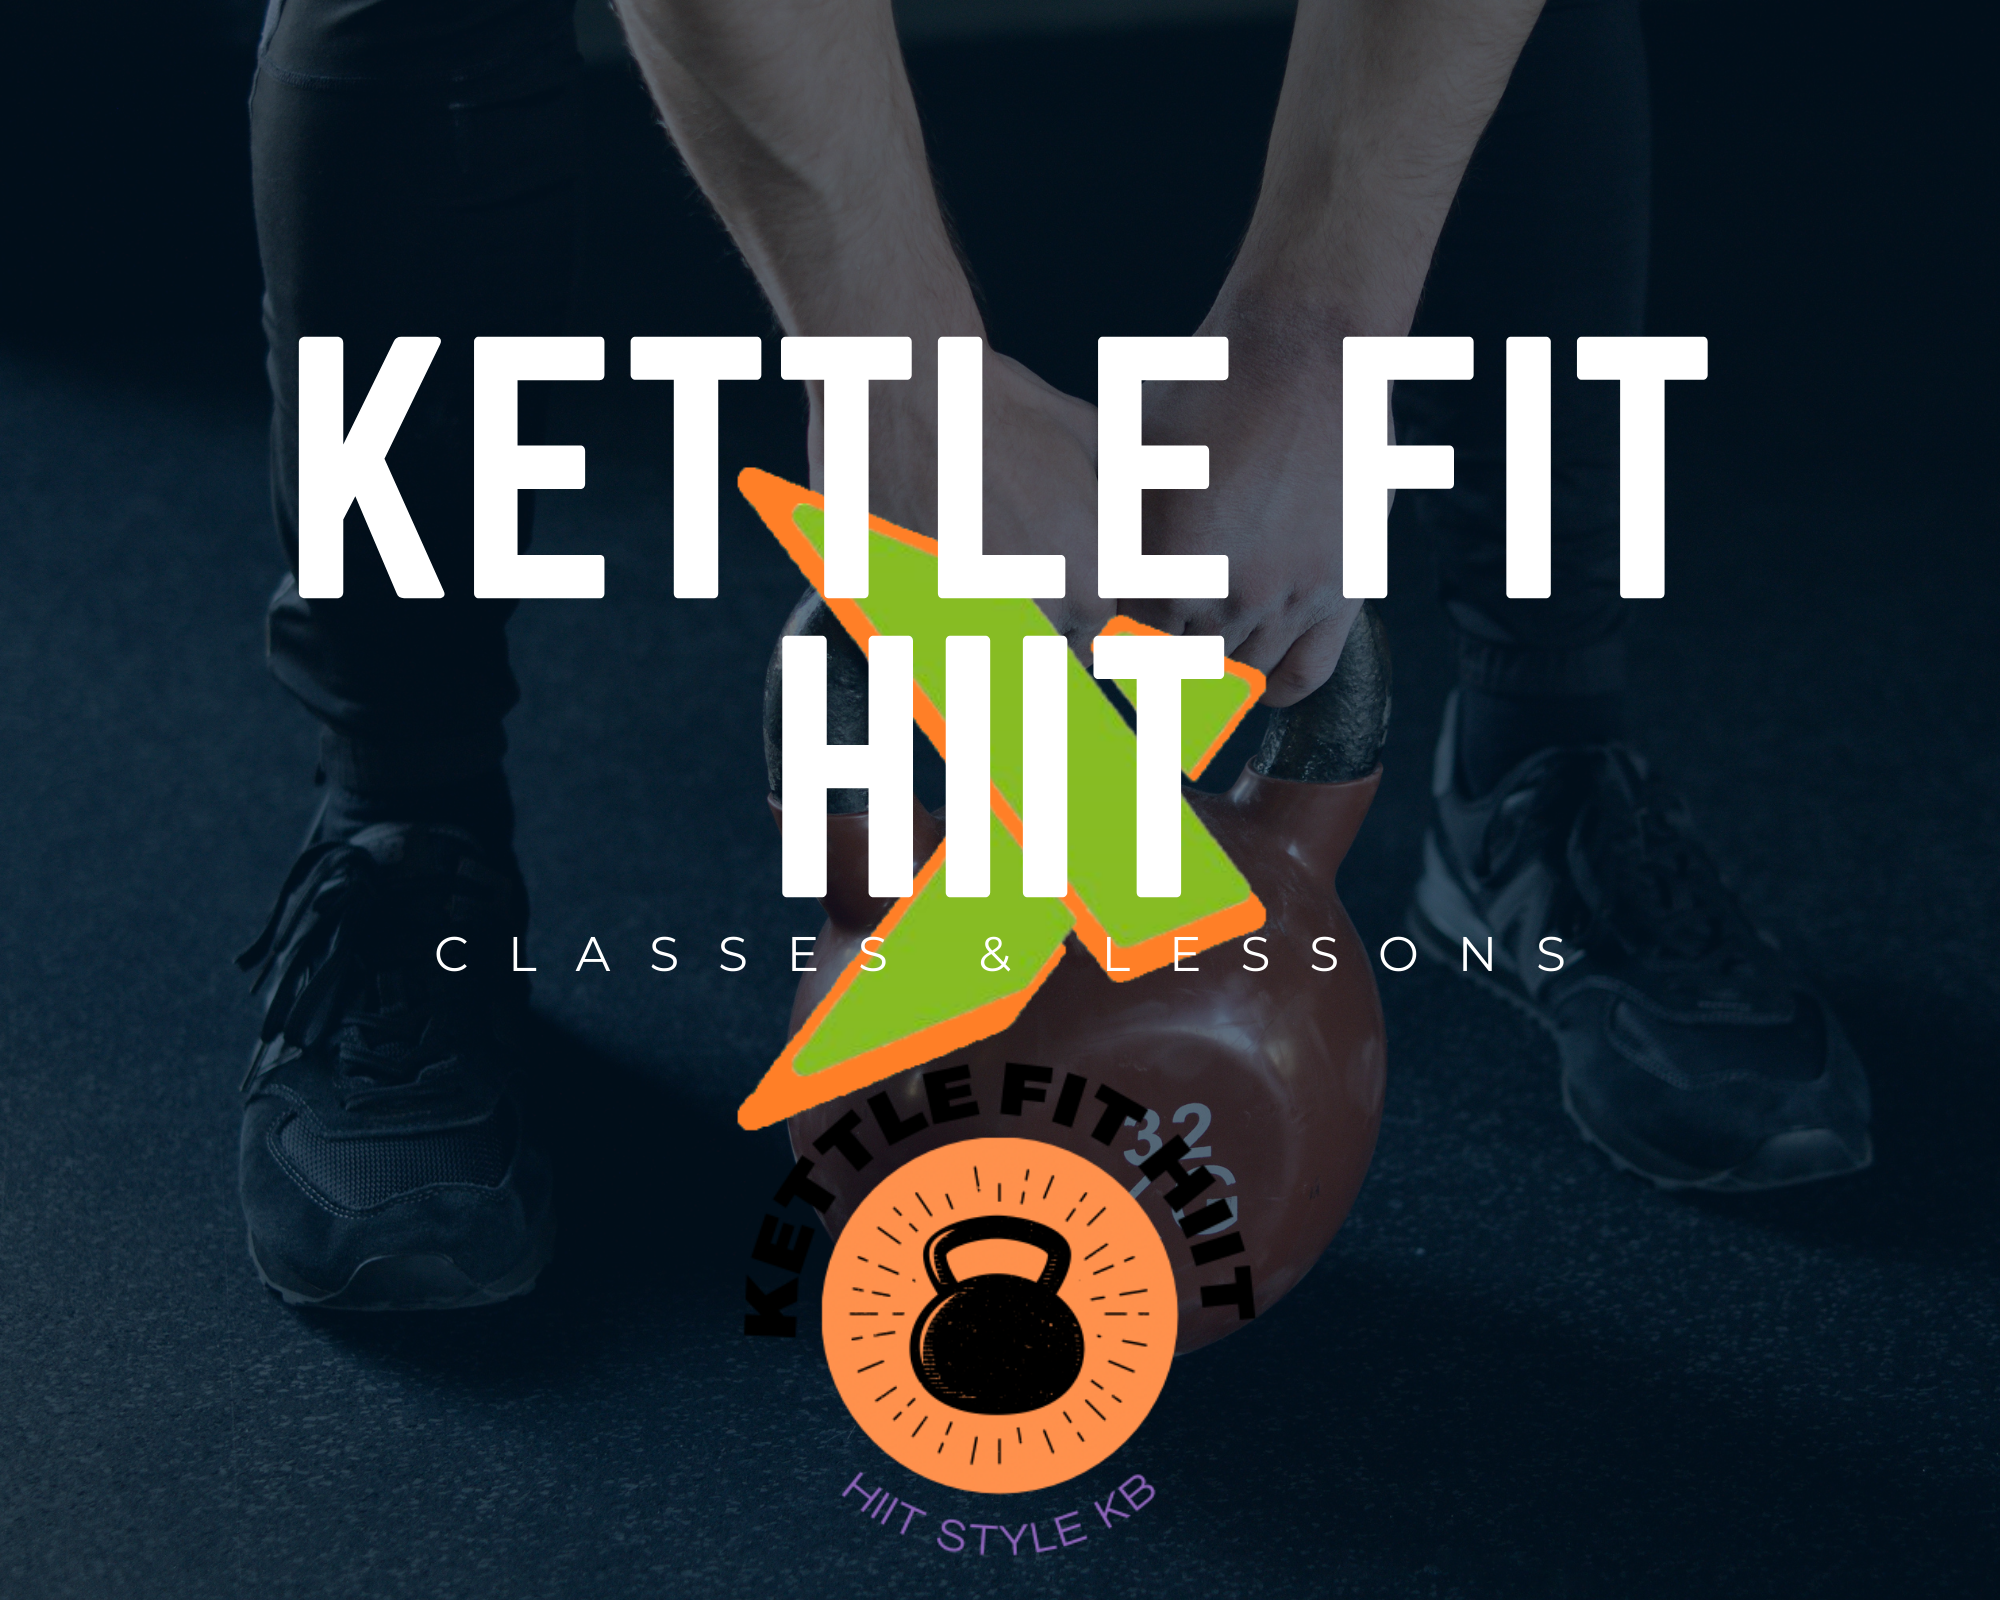 Kettle Fit Hit Lessons